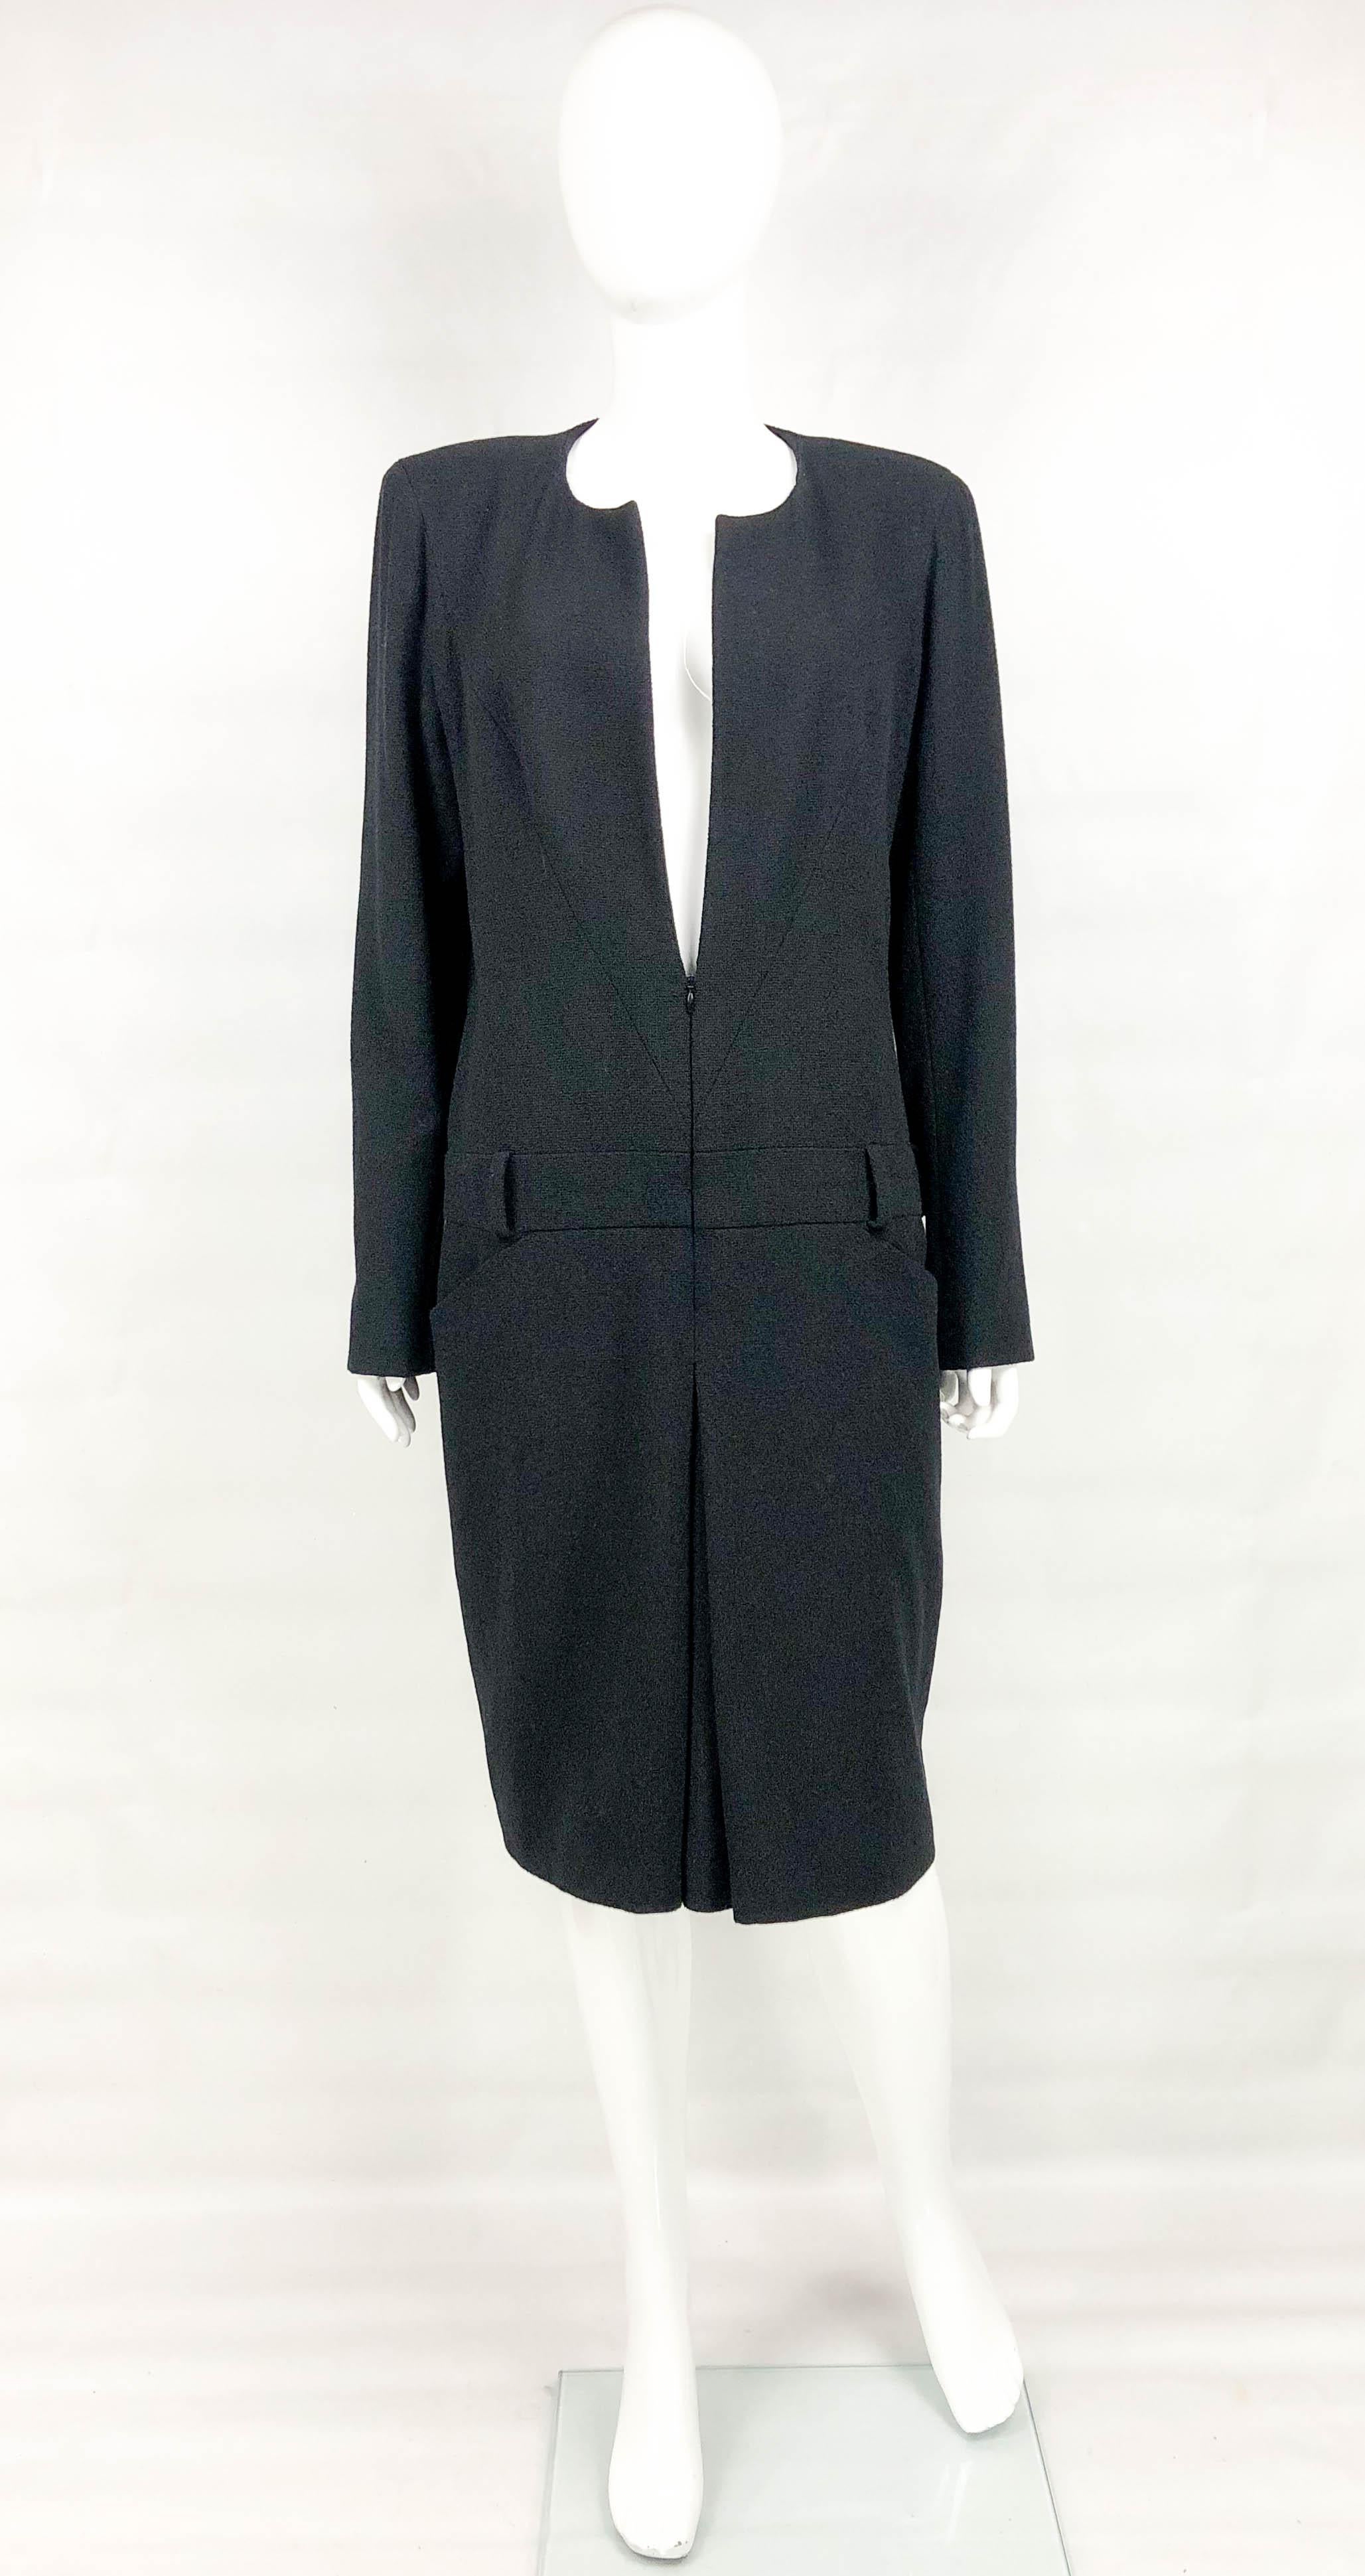 2009 Chanel Runway Look Black Wool Belted Dress / Coat (Large Size) In Excellent Condition For Sale In London, Chelsea